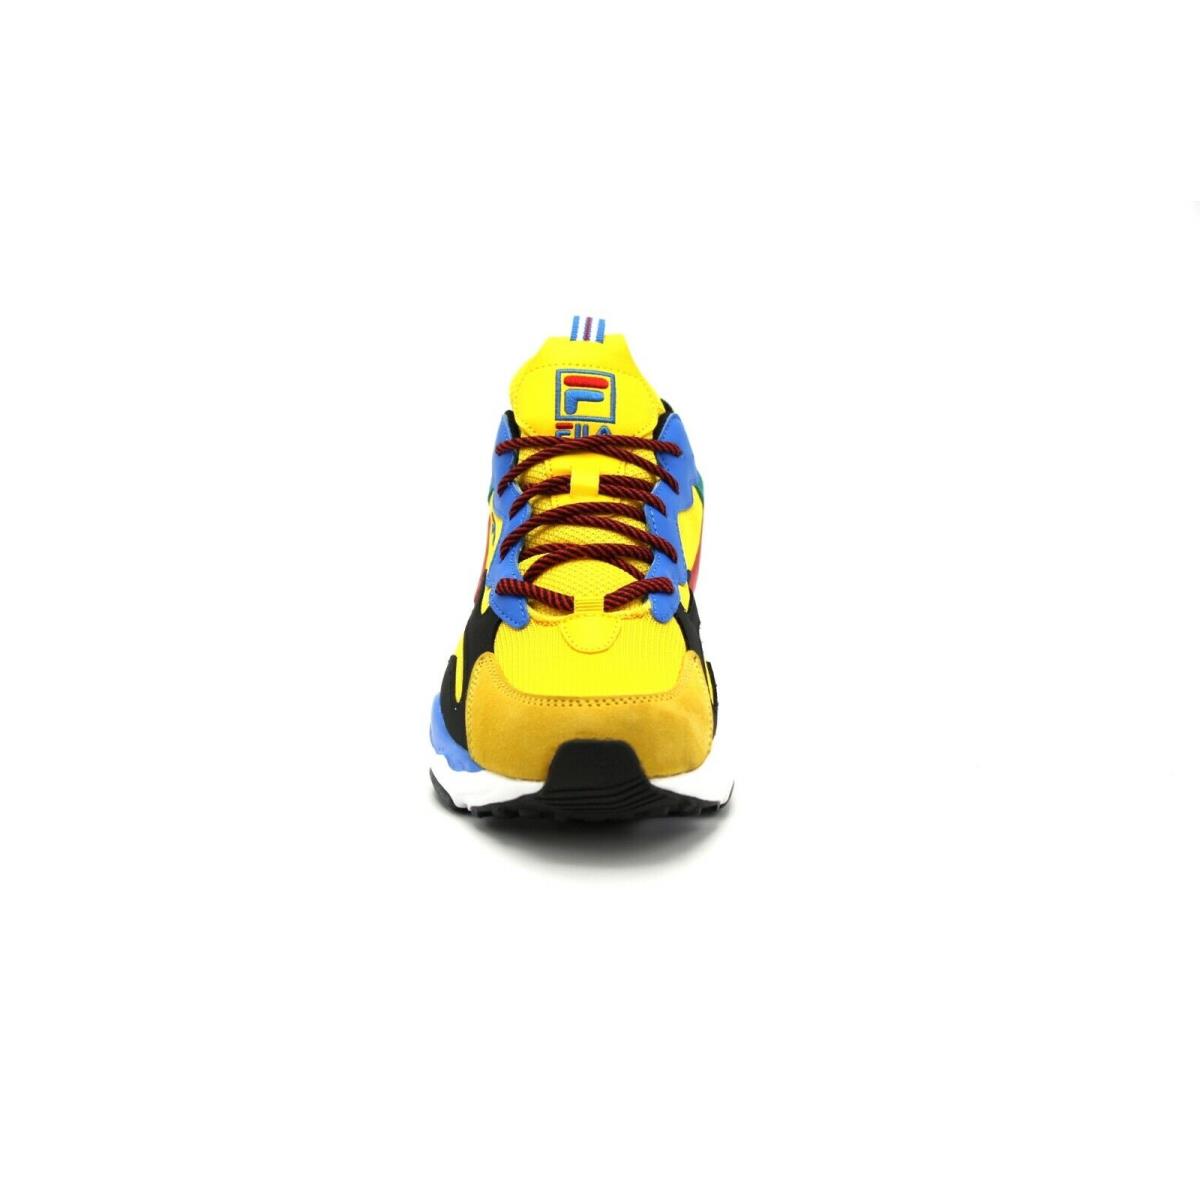 Fila shoes RAY TRACER - Yellow Red Blue Black White 2